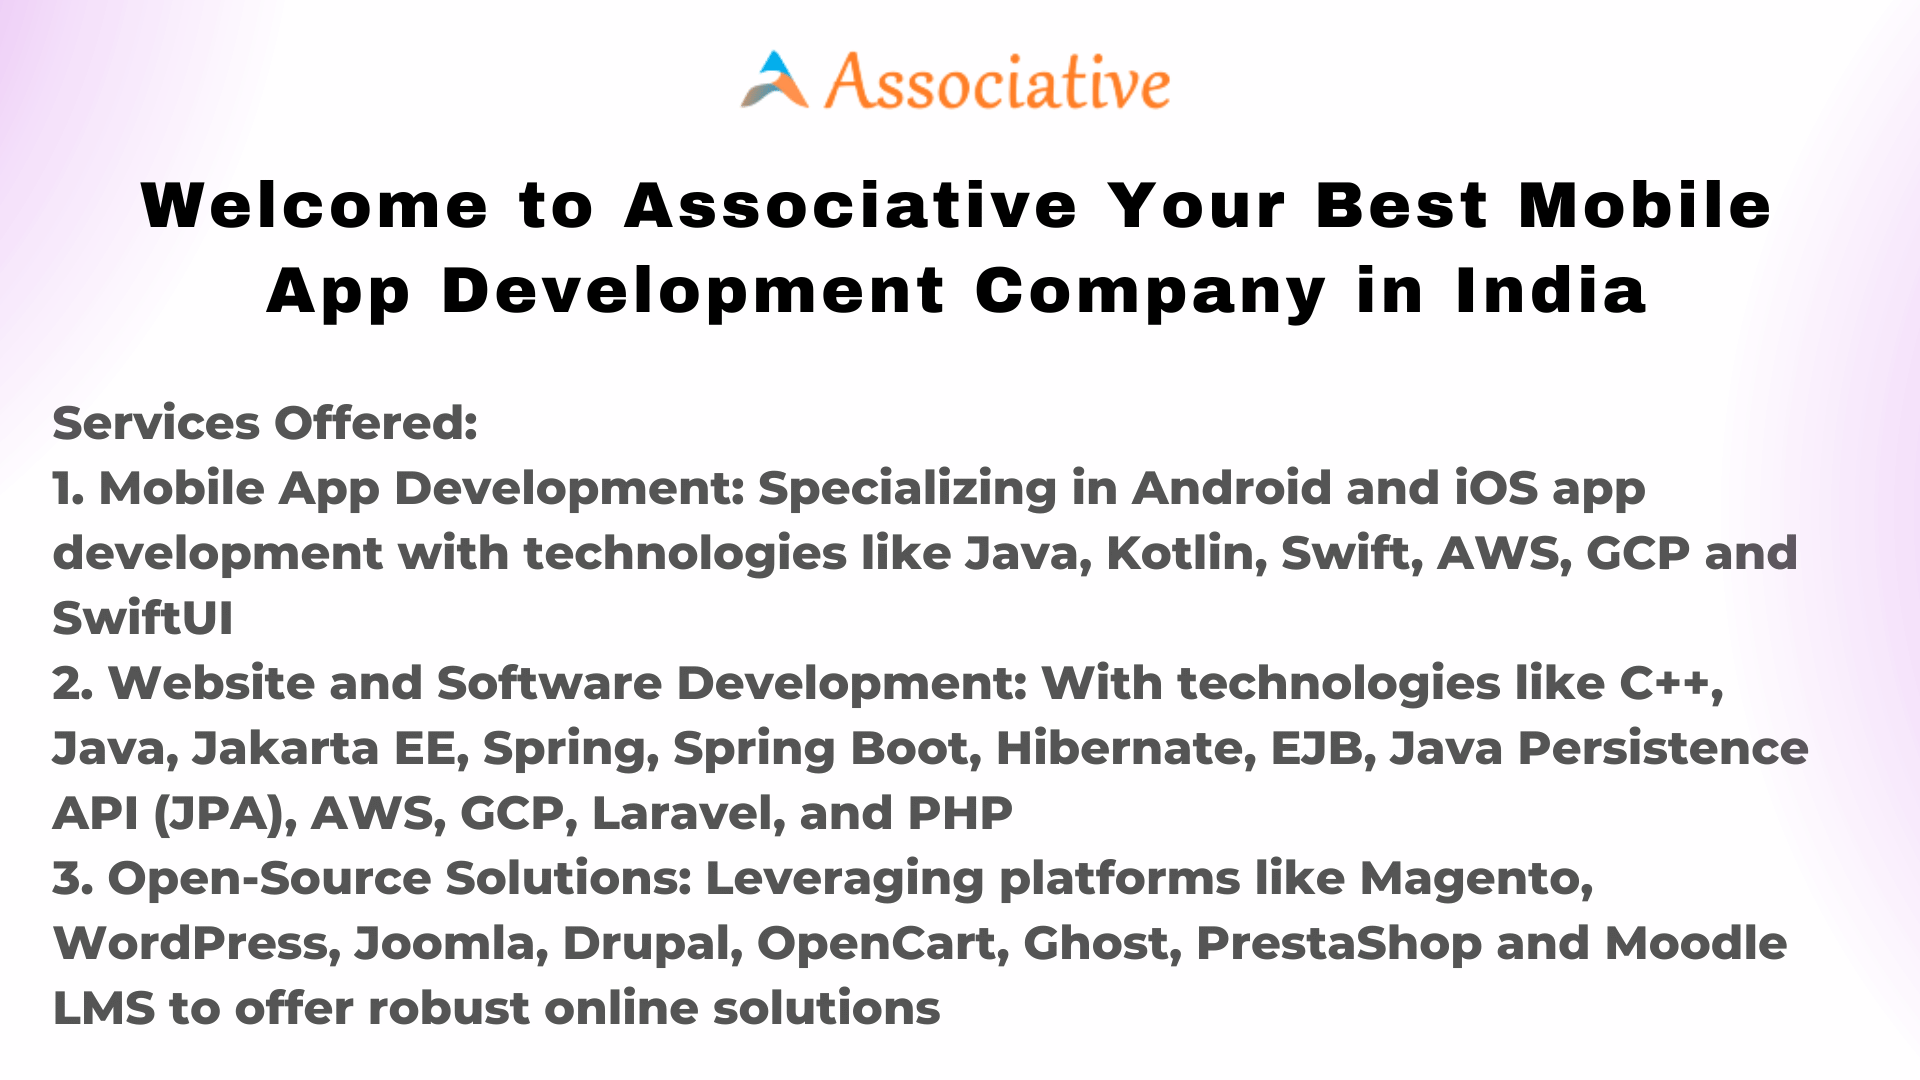 Welcome to Associative Your Best Mobile App Development Company in India